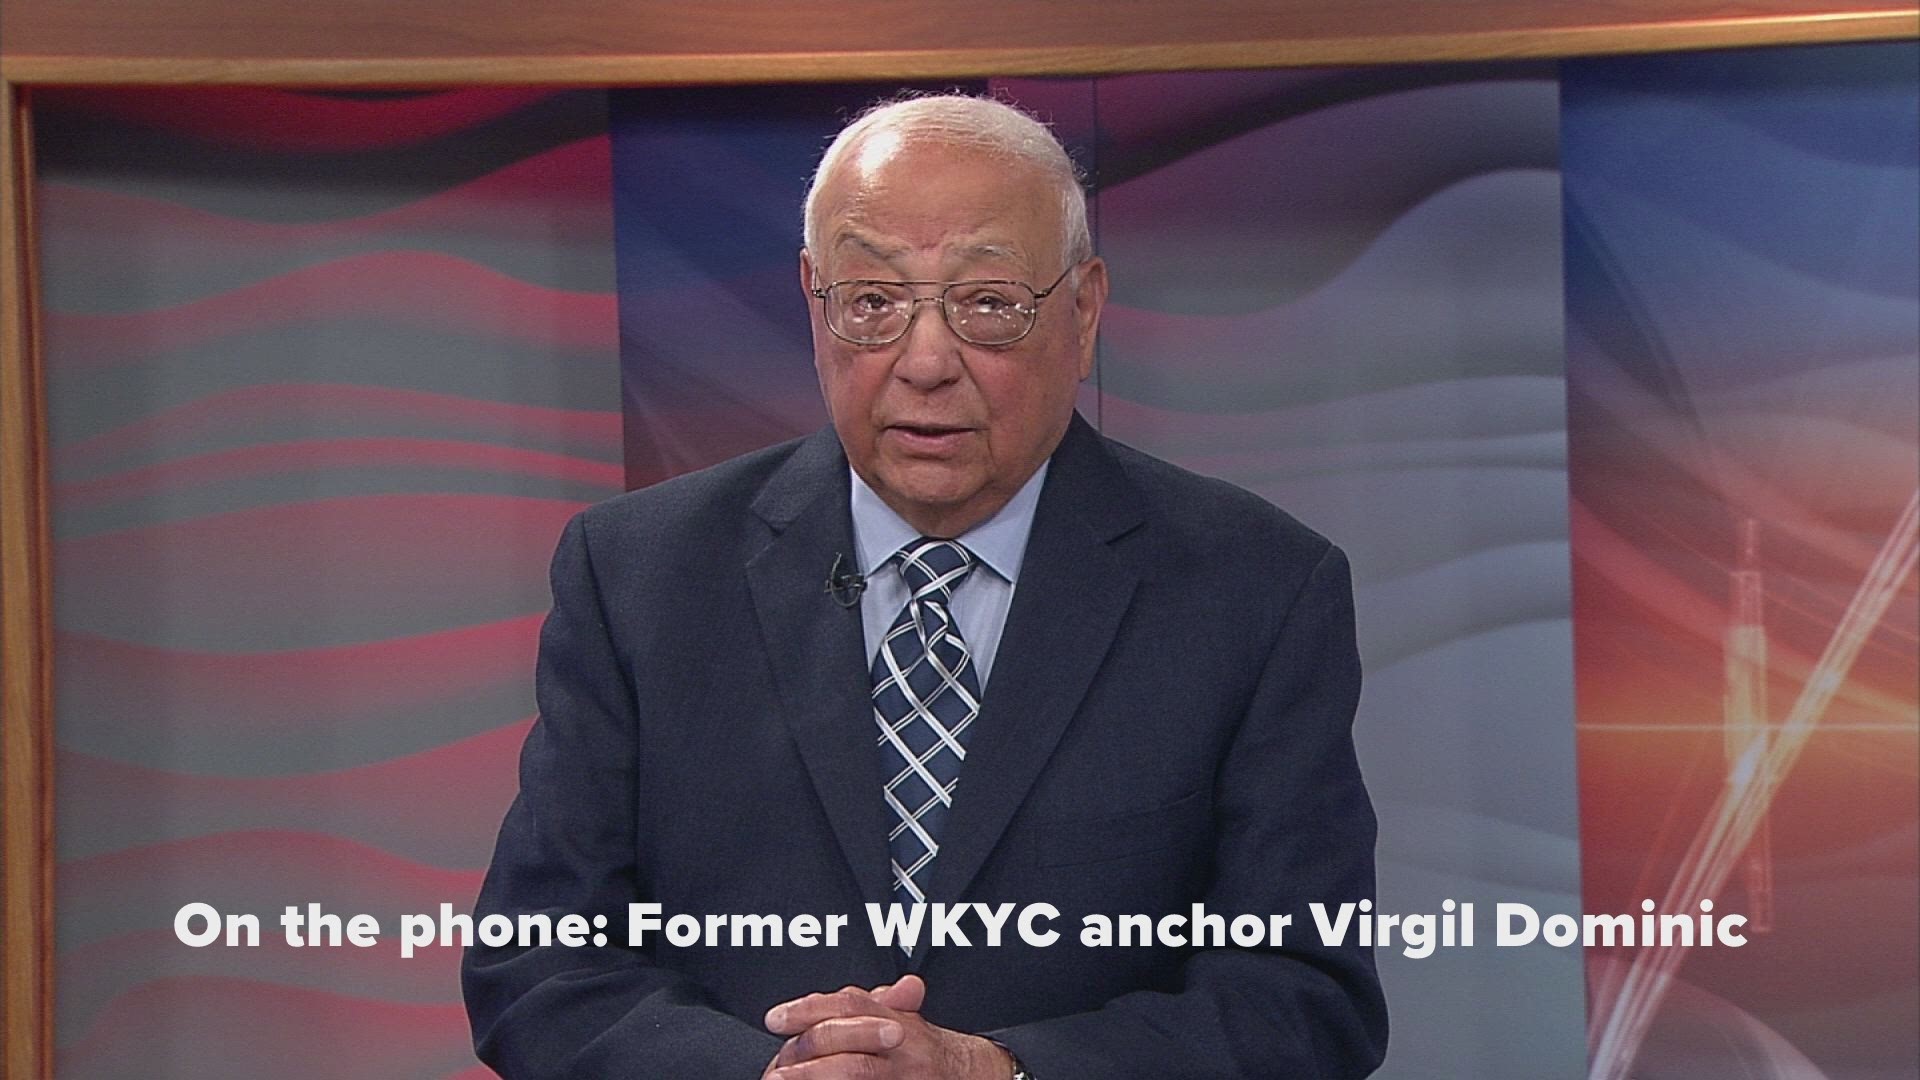 Former WKYC anchor Virgil Dominic discusses the life and career of Doug Adair, who passed away Wednesday.